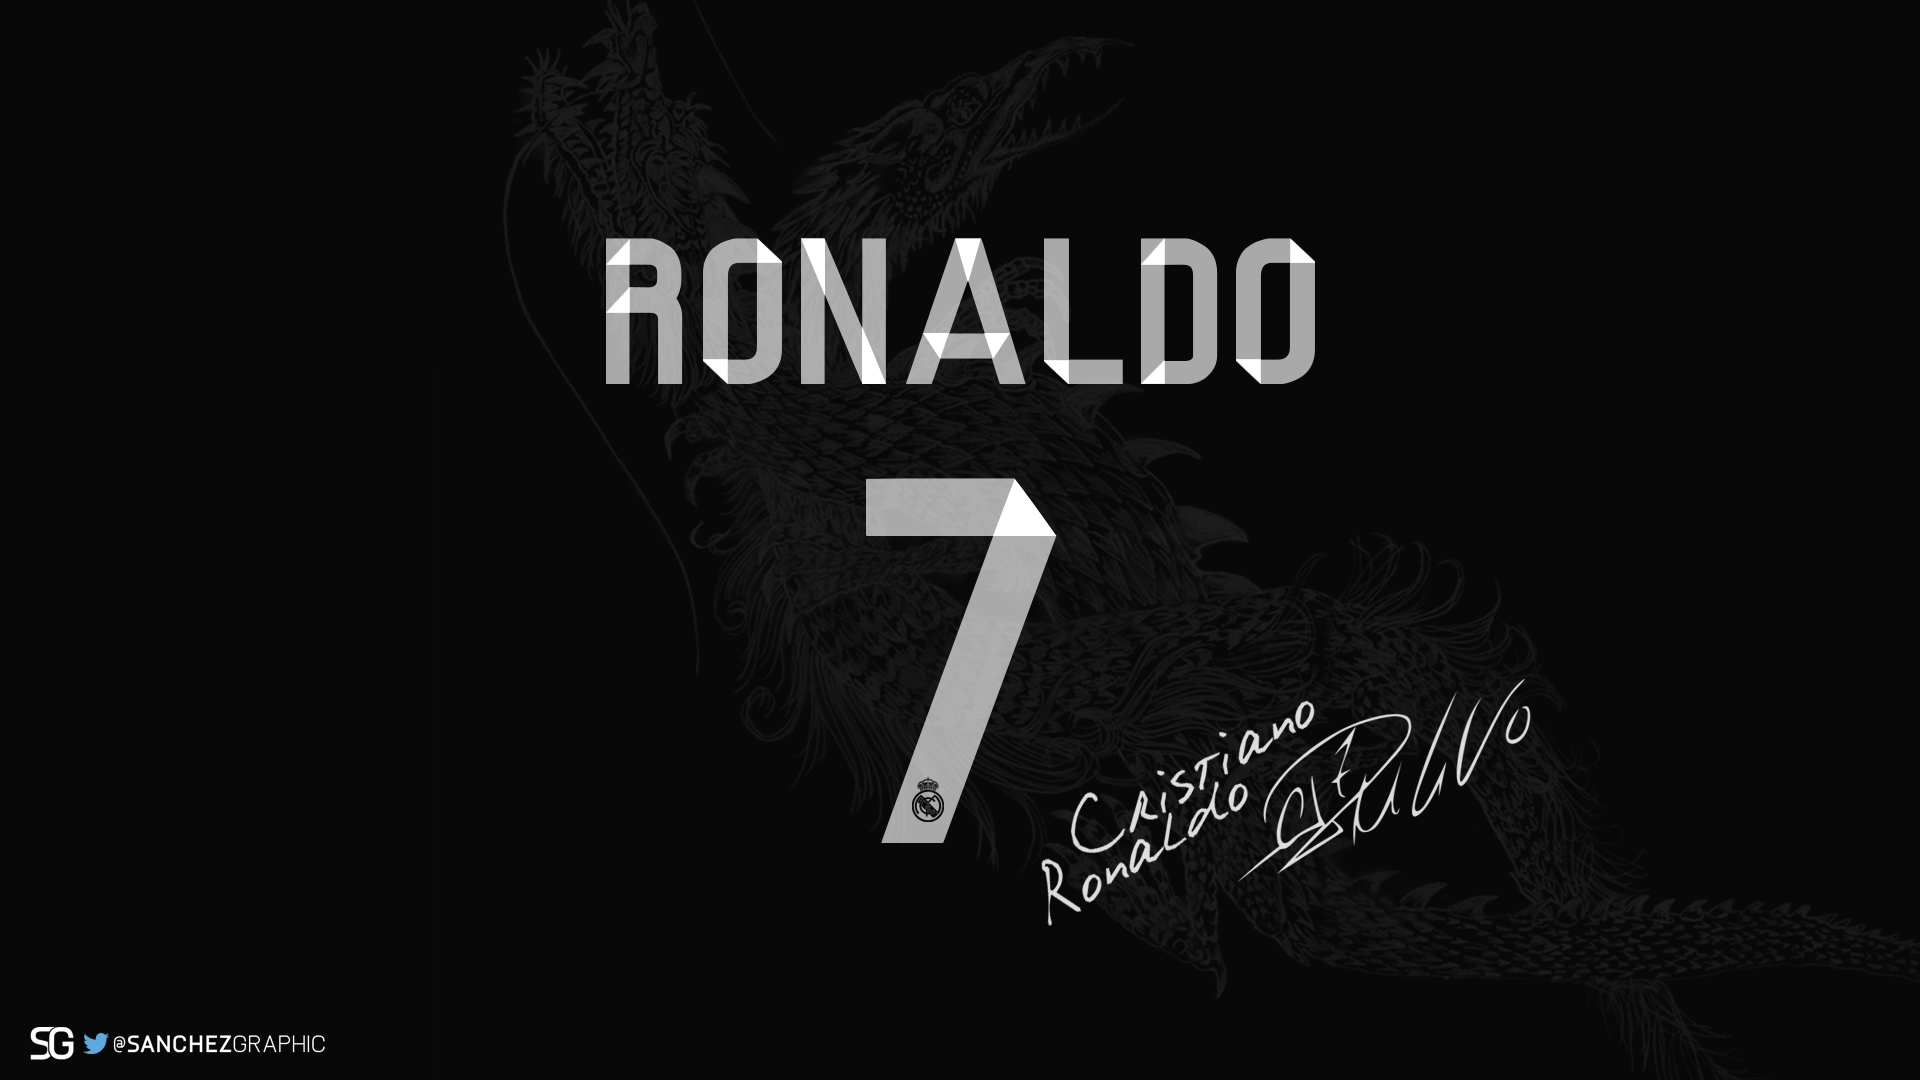 General 1920x1080 Cristiano Ronaldo numbers simple background soccer sport typography black background watermarked